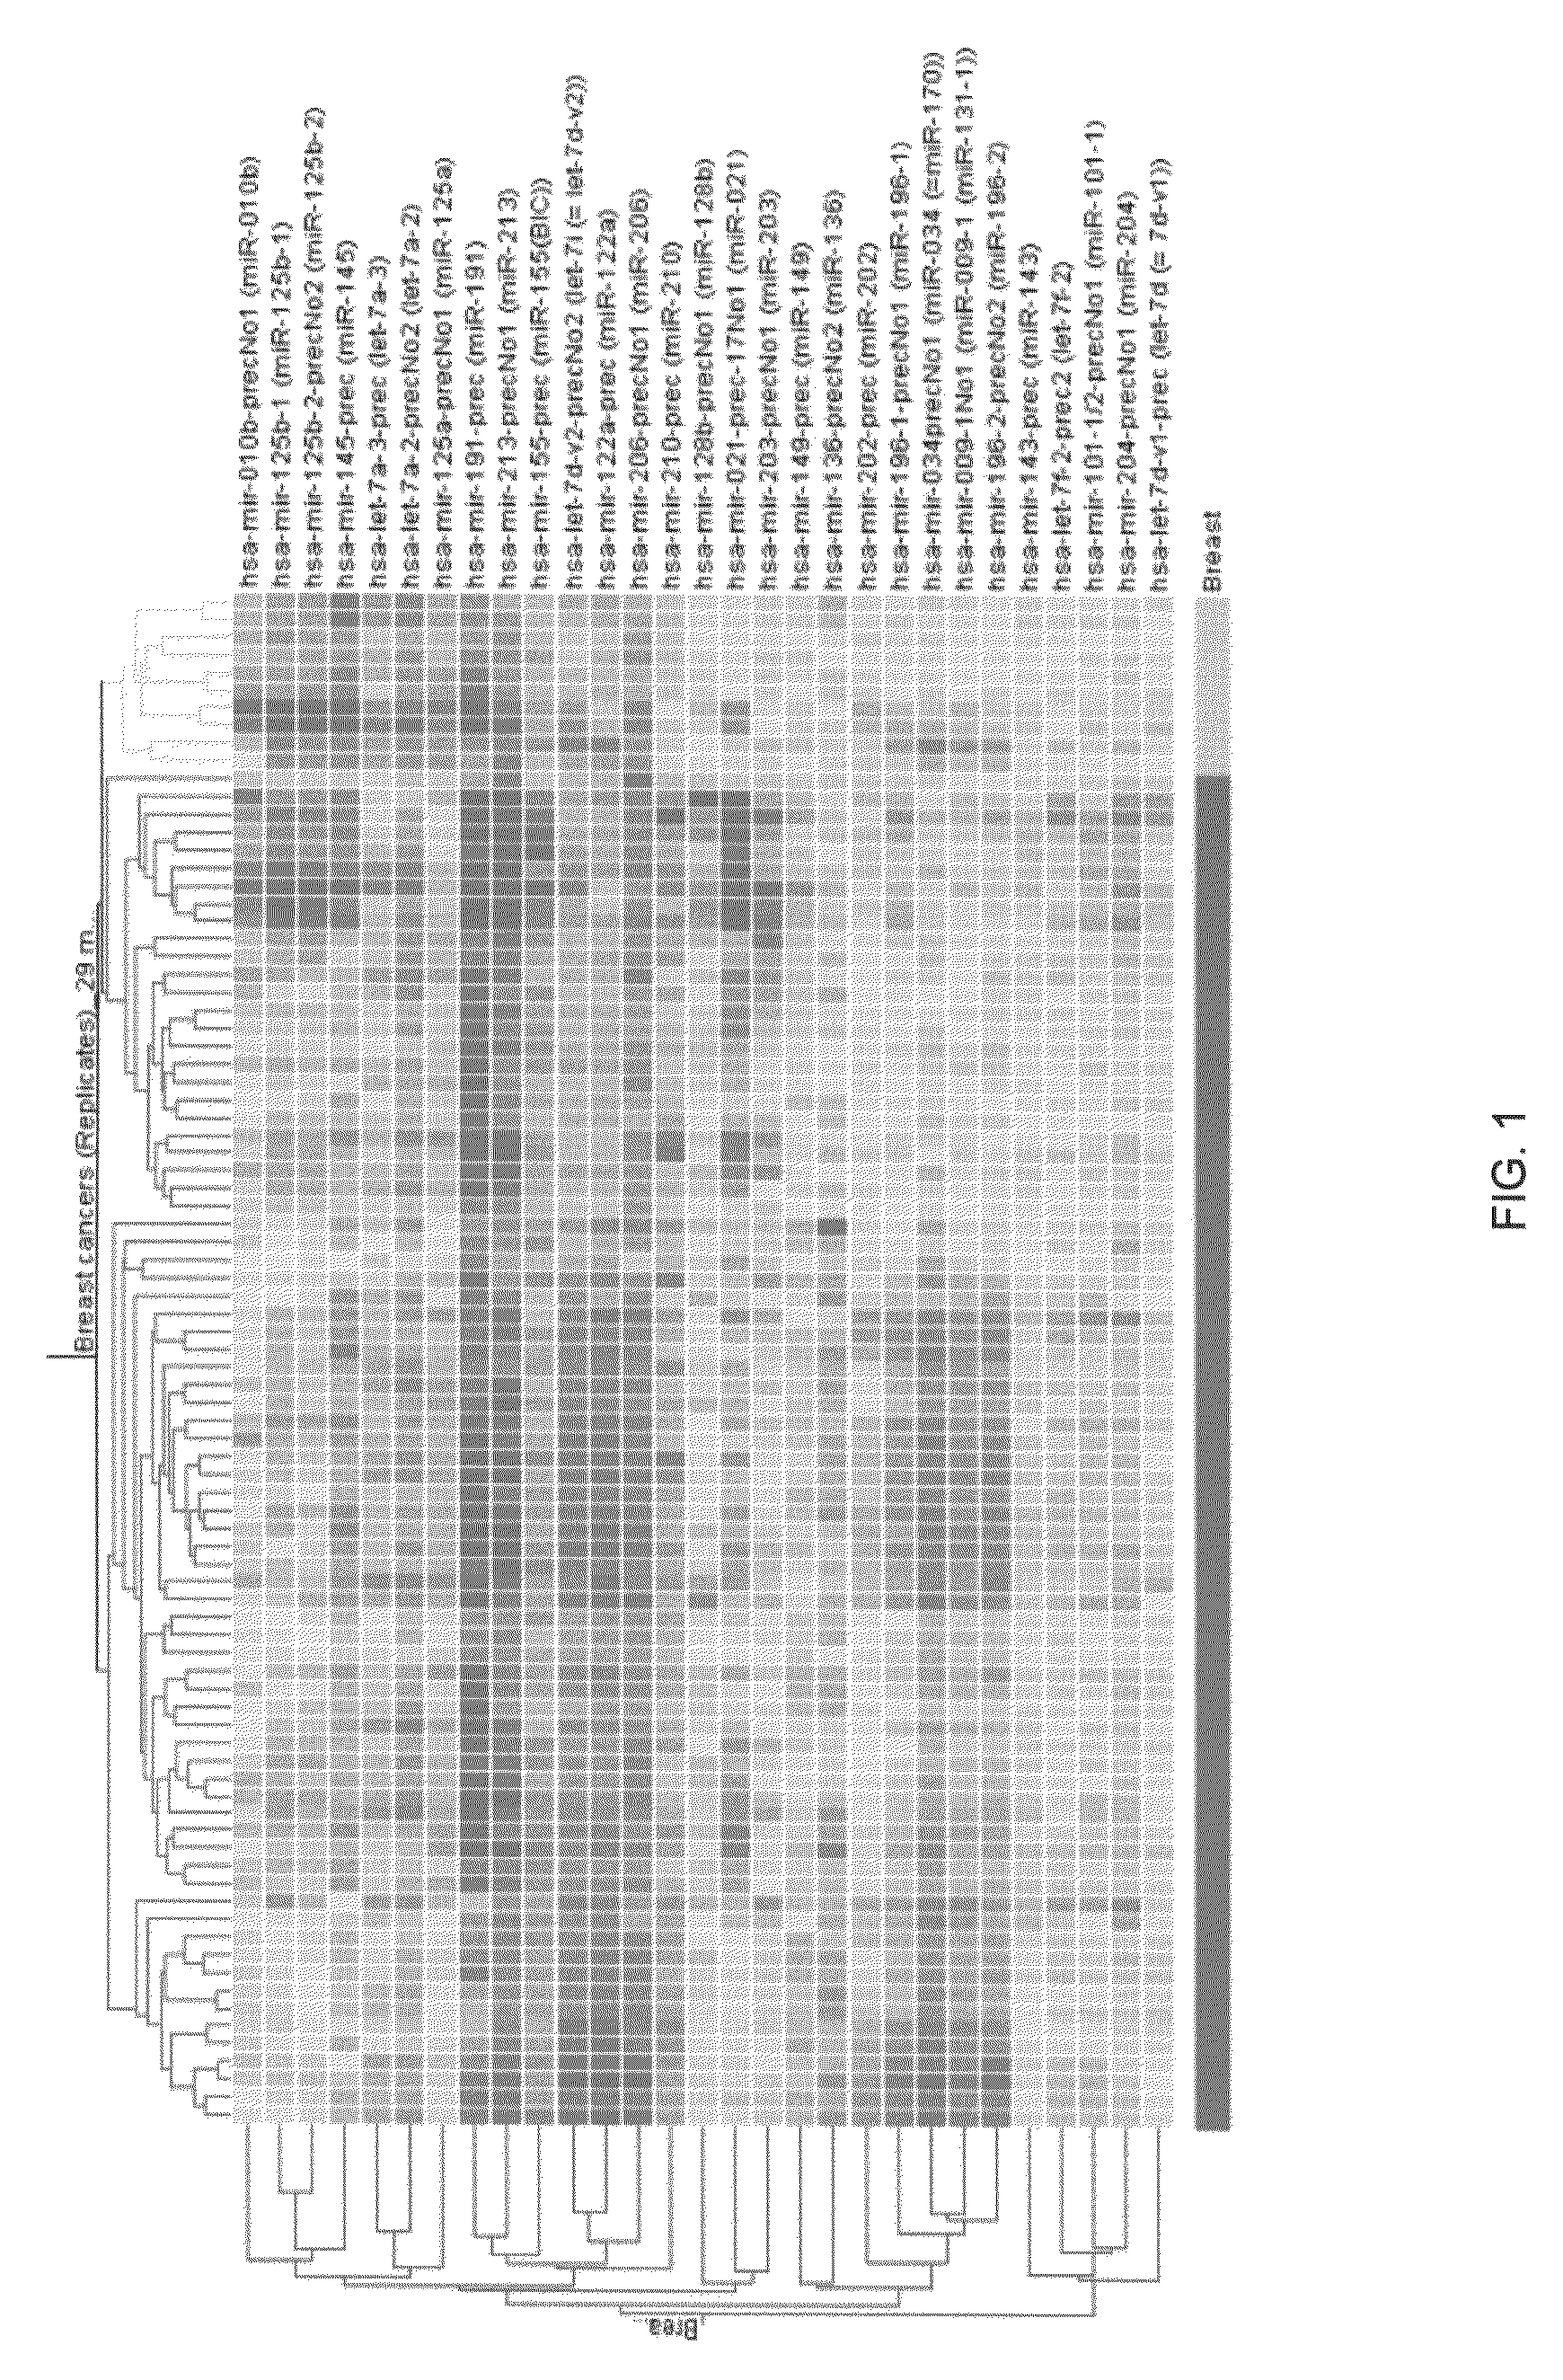 MicroRNA-based methods and compositions for the diagnosis, prognosis and treatment of breast cancer